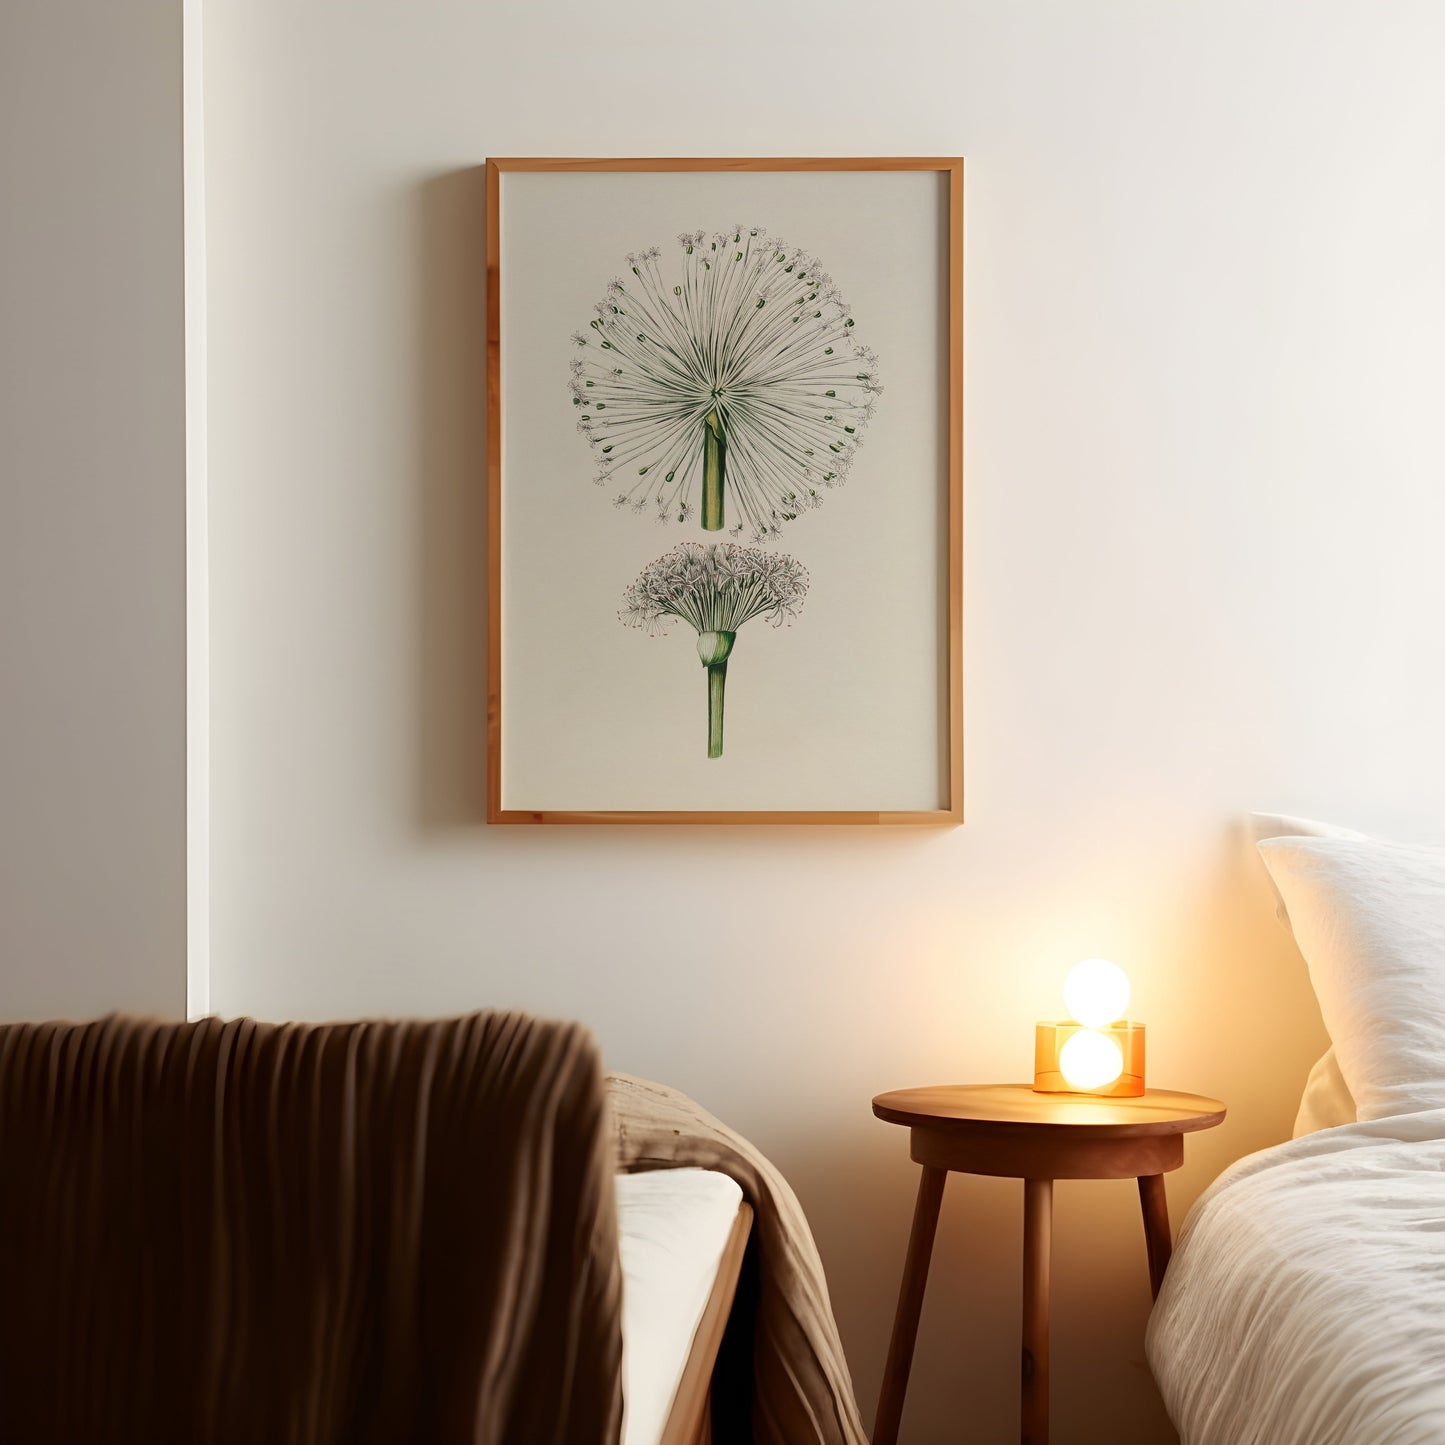 a picture of a dandelion on a wall above a bed